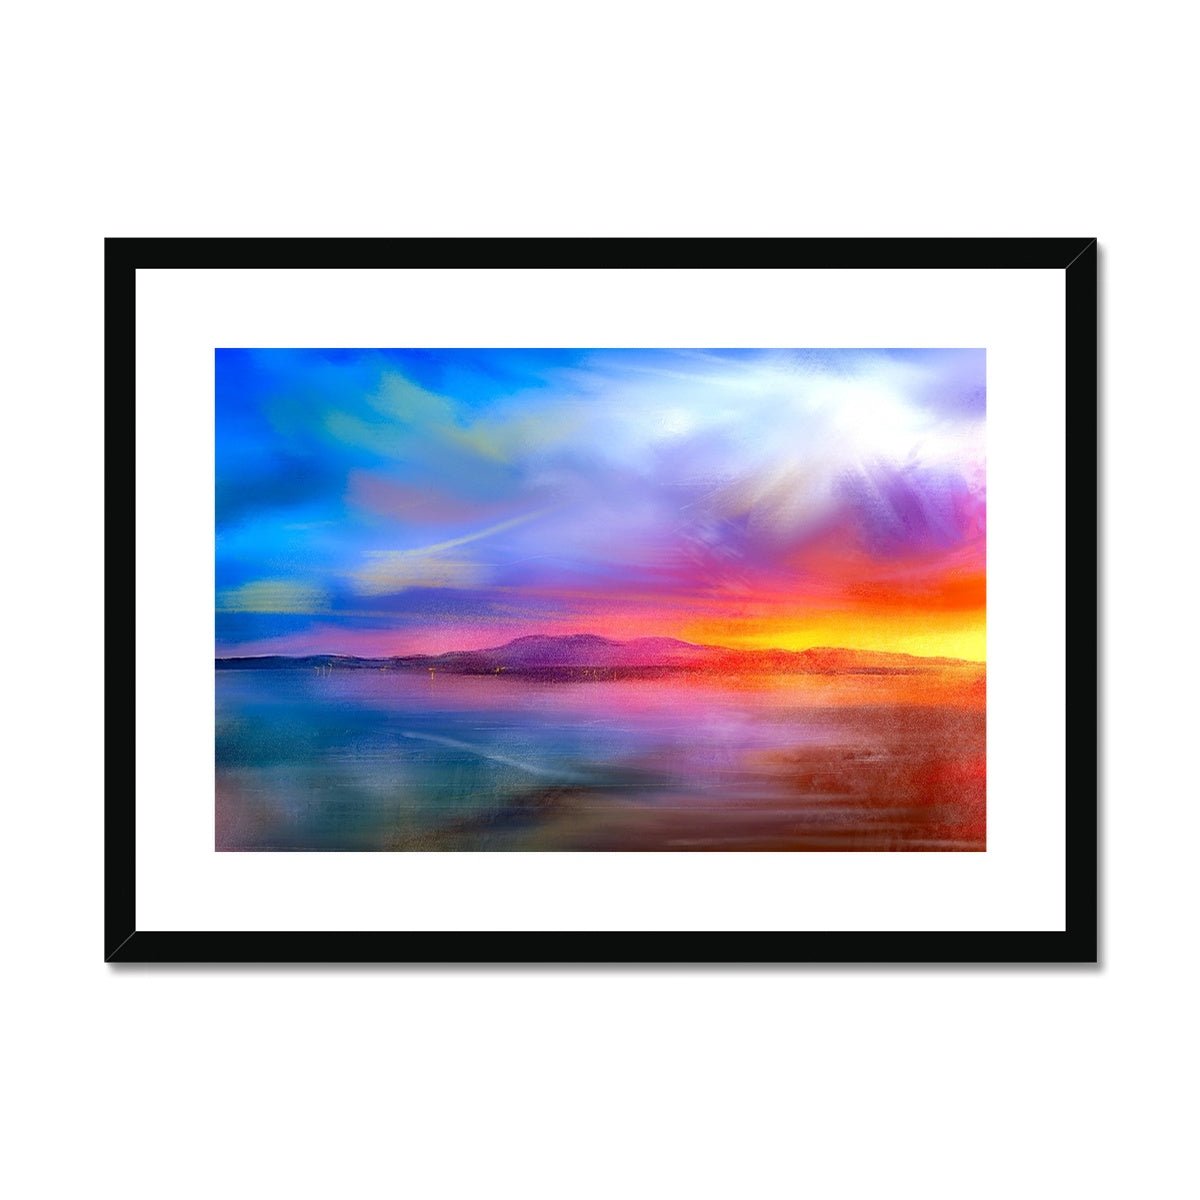 Arran Sunset Painting | Framed & Mounted Prints From Scotland-Framed & Mounted Prints-Arran Art Gallery-A2 Landscape-Black Frame-Paintings, Prints, Homeware, Art Gifts From Scotland By Scottish Artist Kevin Hunter